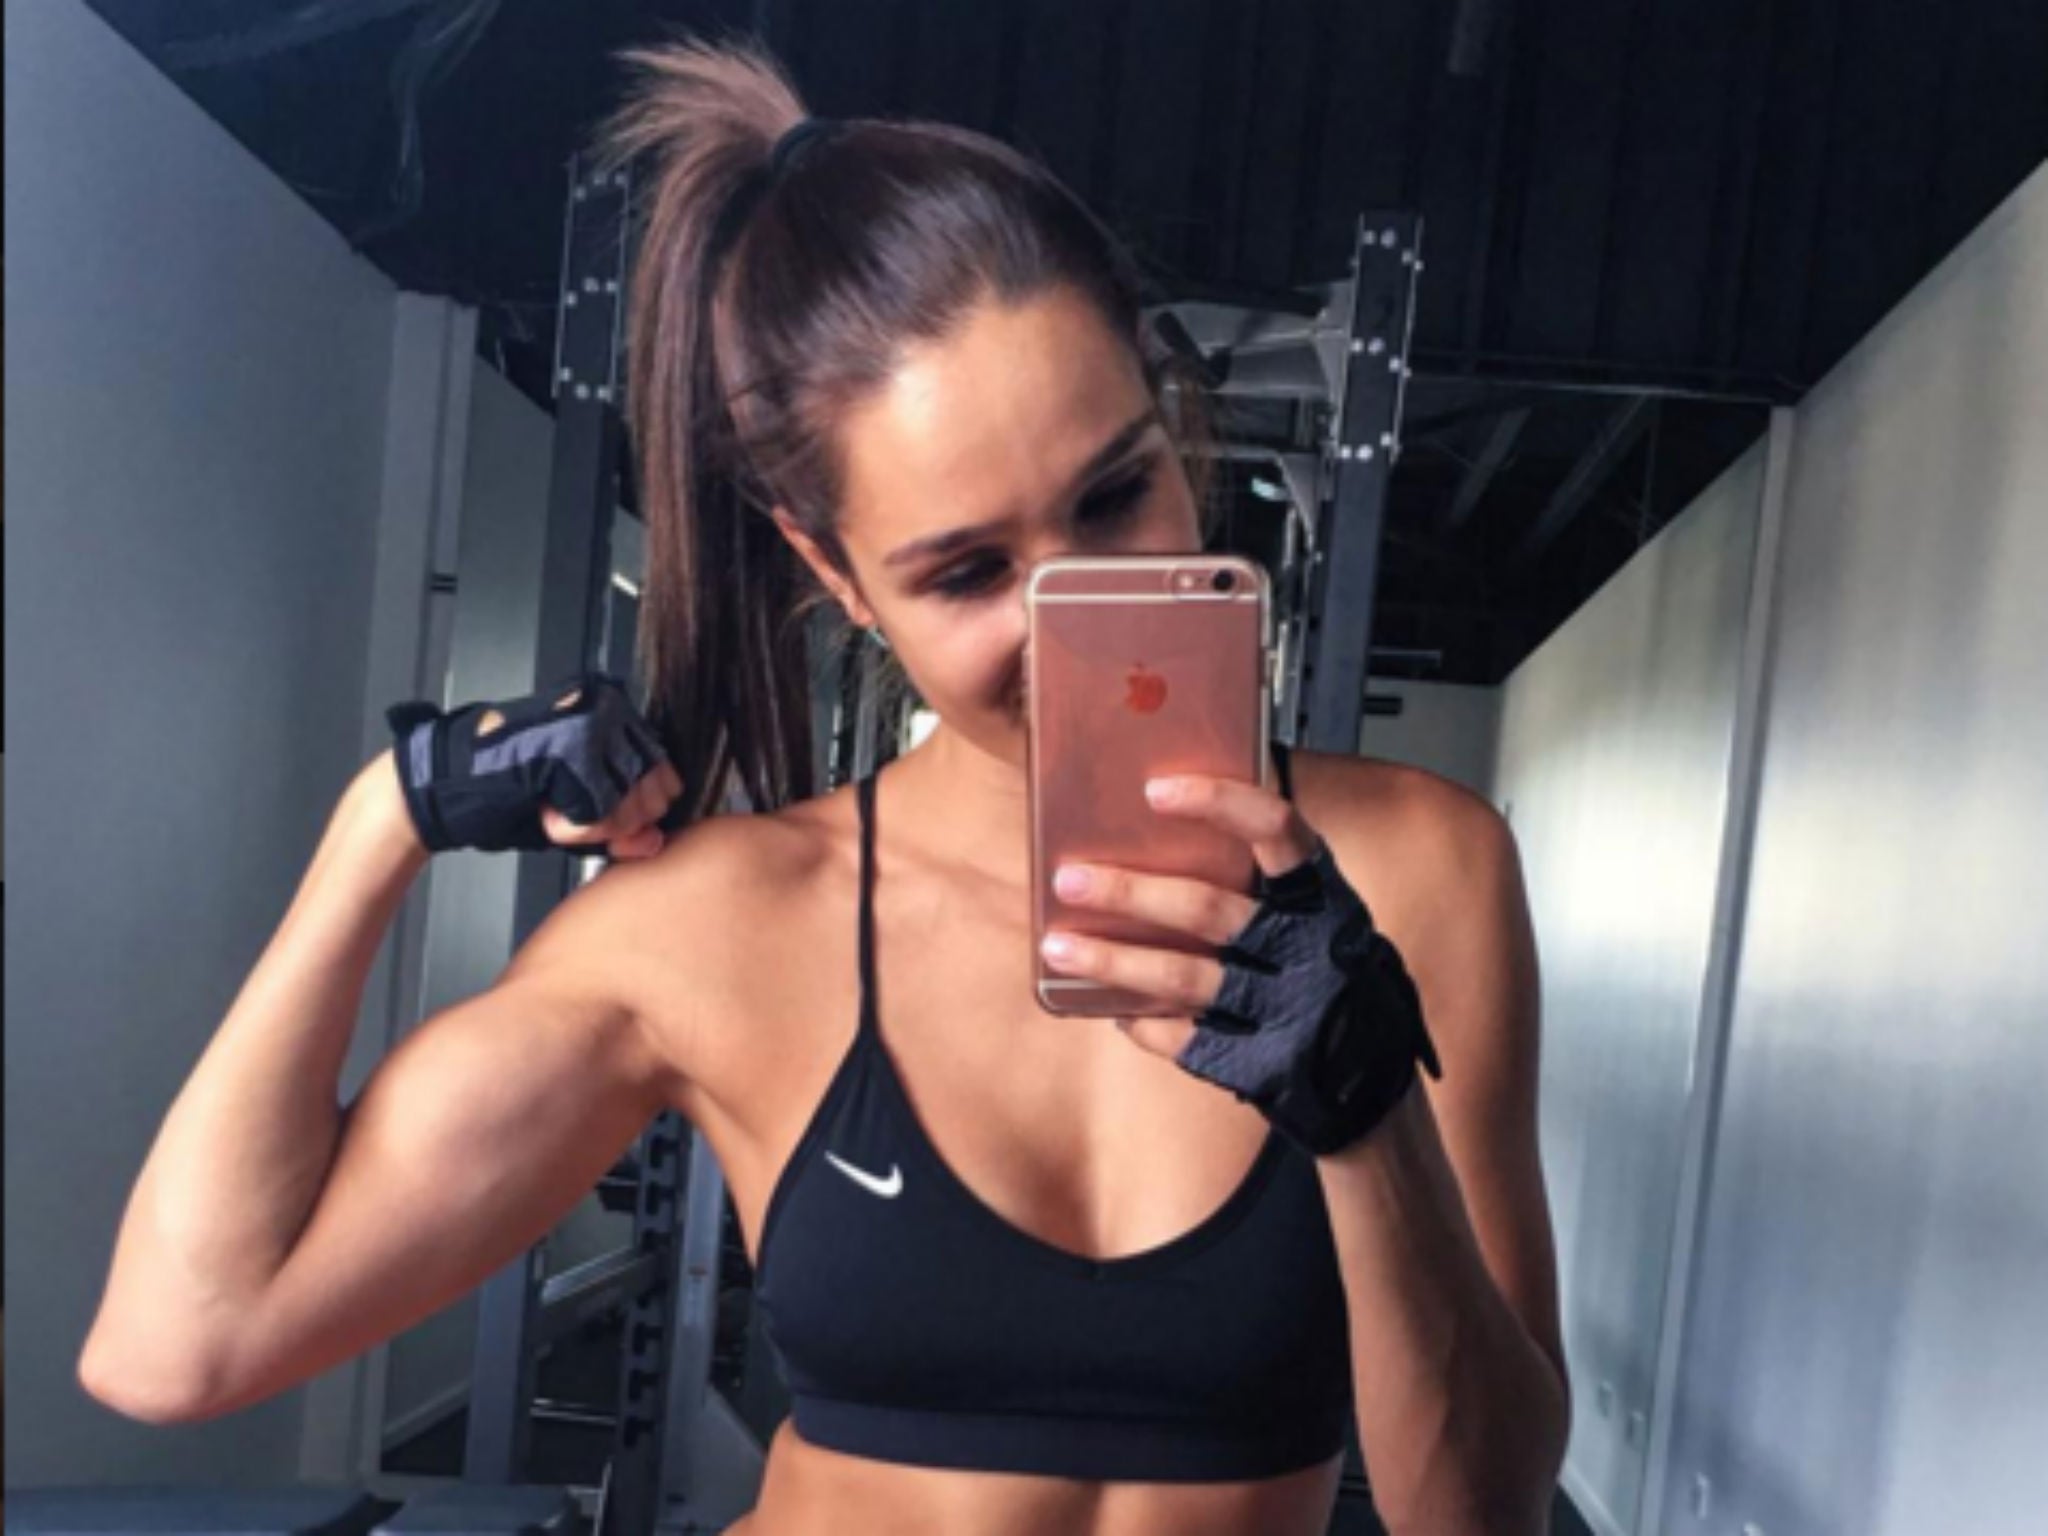 Kayla Itsines: Who is the social media influencer and fitness guru?, The  Independent